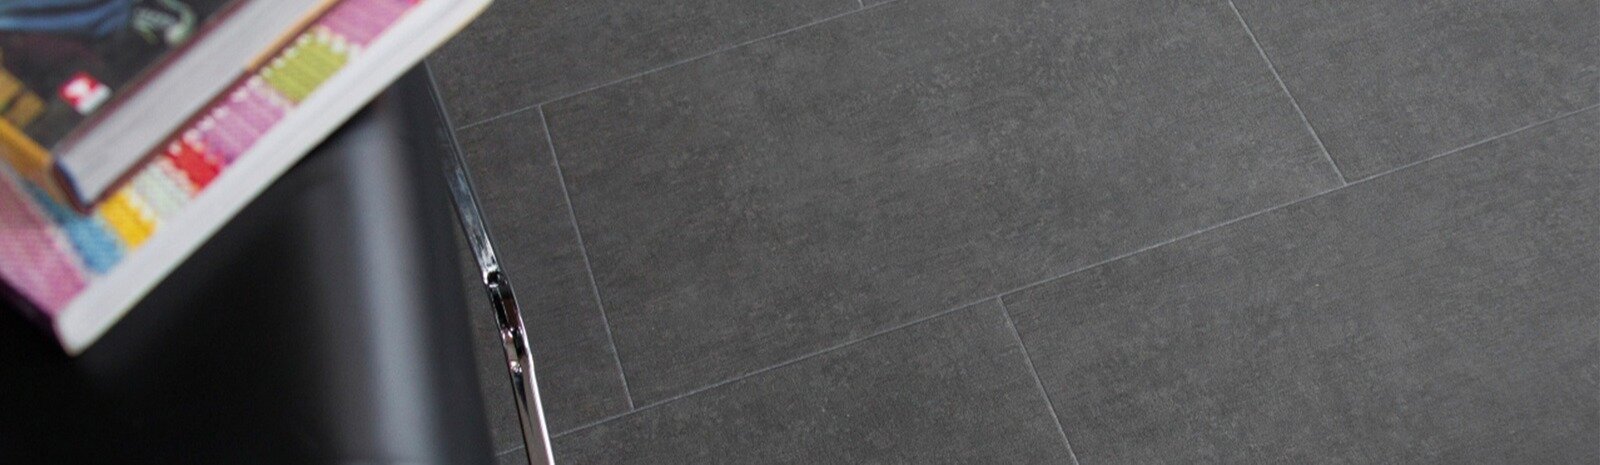 https://www.lincolnshireflooring.co.uk/images/social/which-type-of-flooring-is-the-easiest-to-keep-clean-4d0fa5.jpg